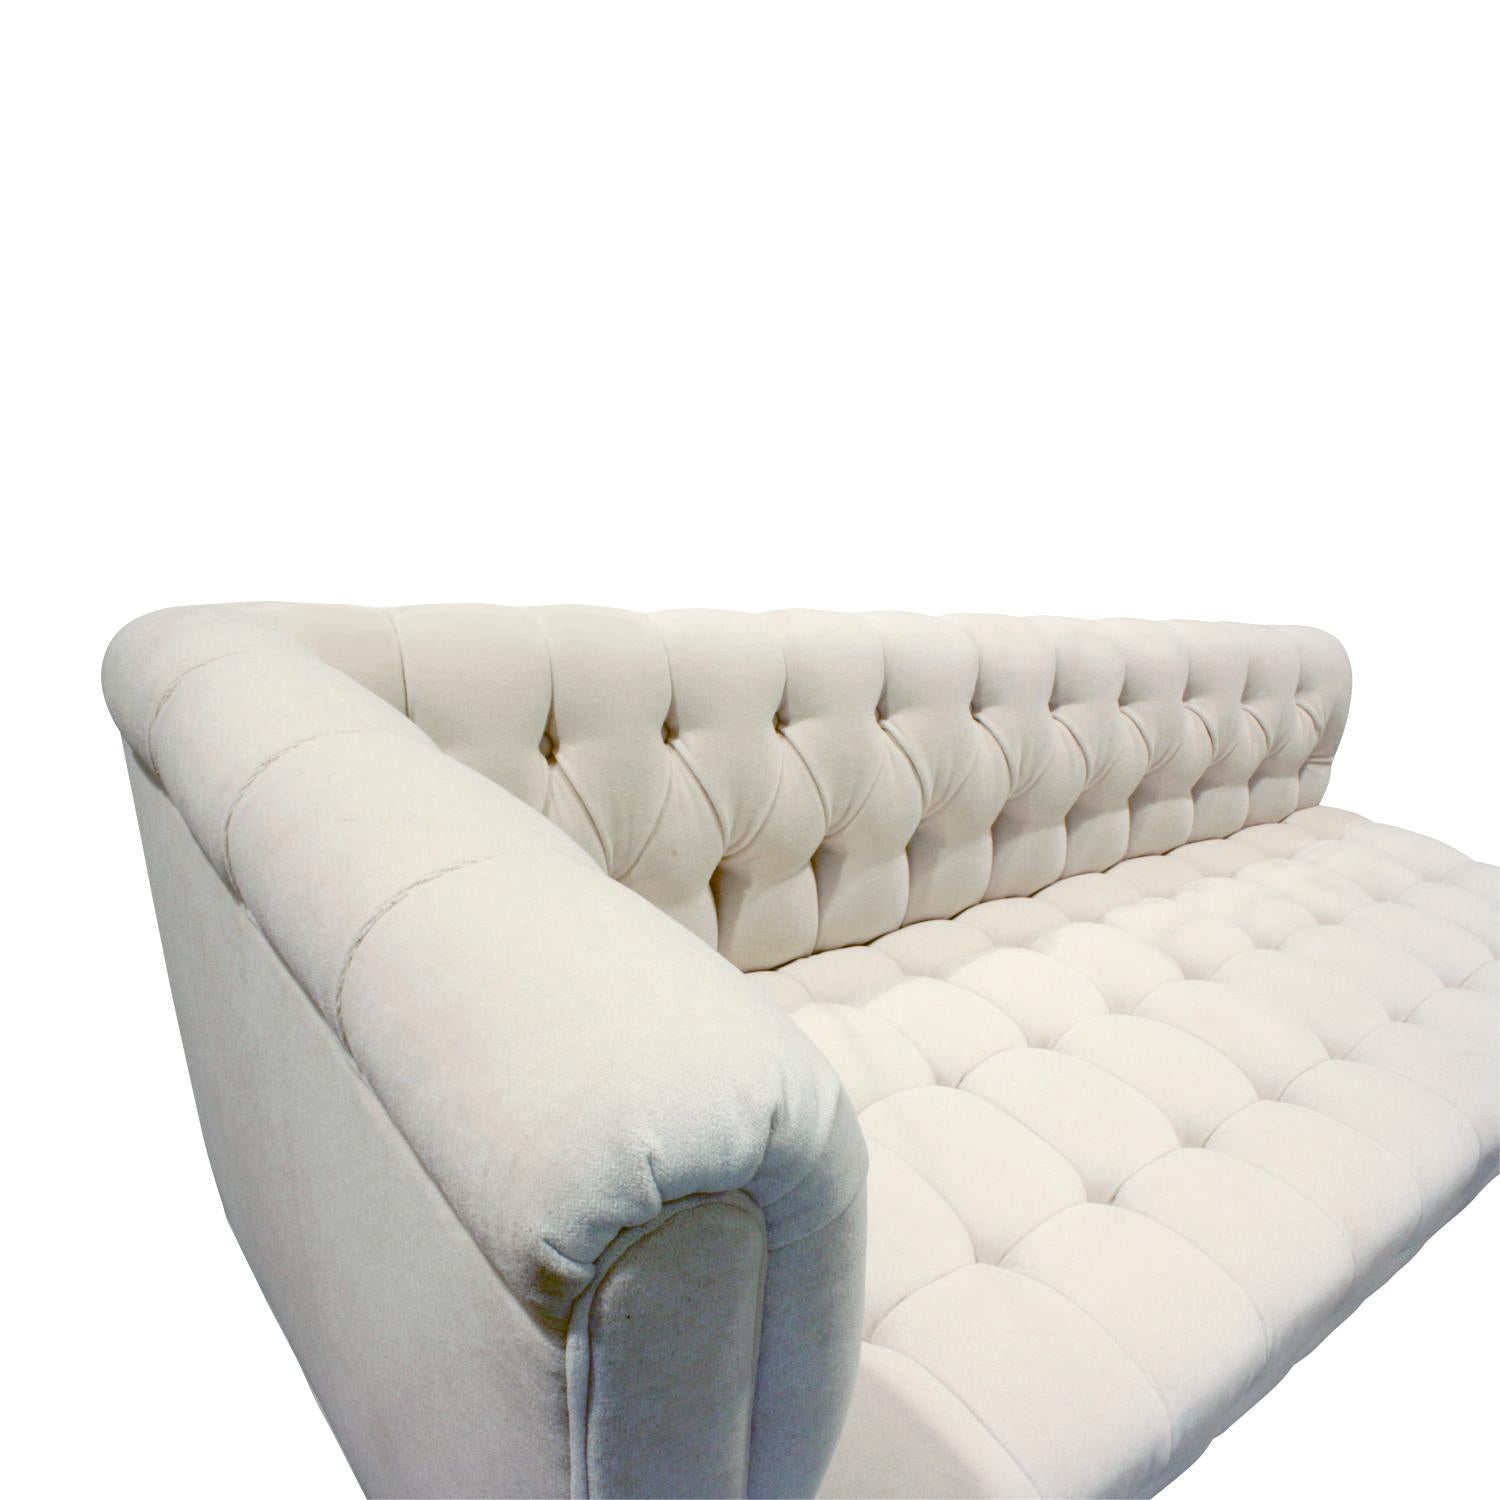 Hand-Crafted Edward Wormley Rare Tufted 